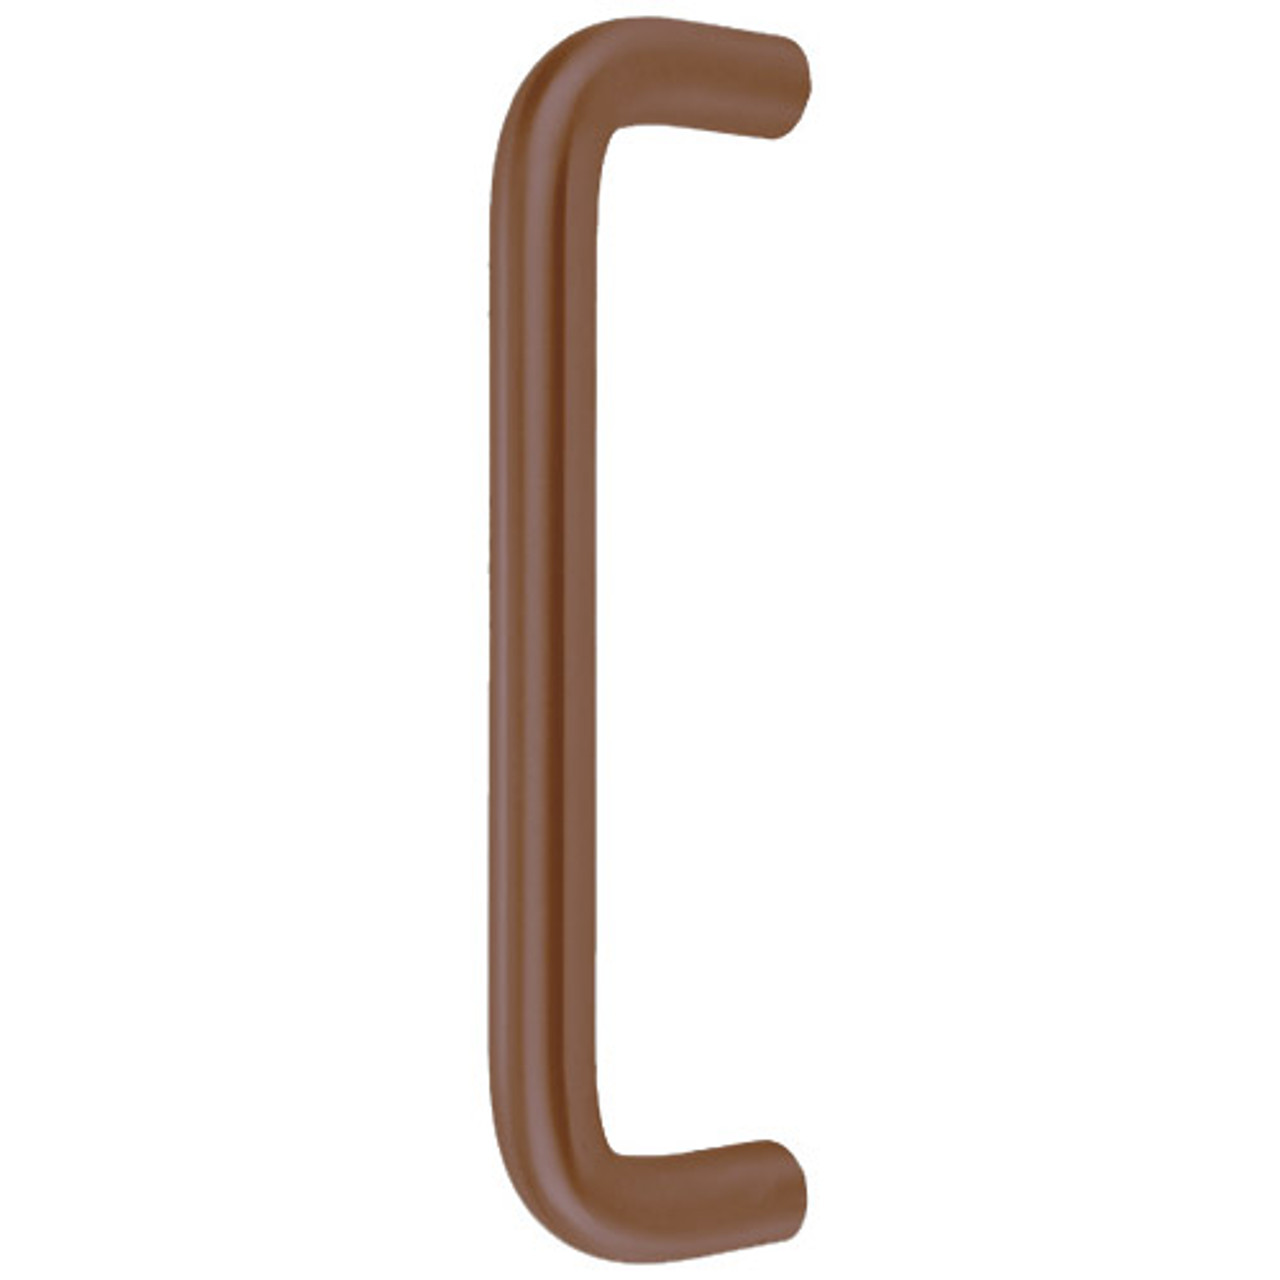 22-613 Don Jo 1" Round Door Pull in Oil Rubbed Bronze Finish